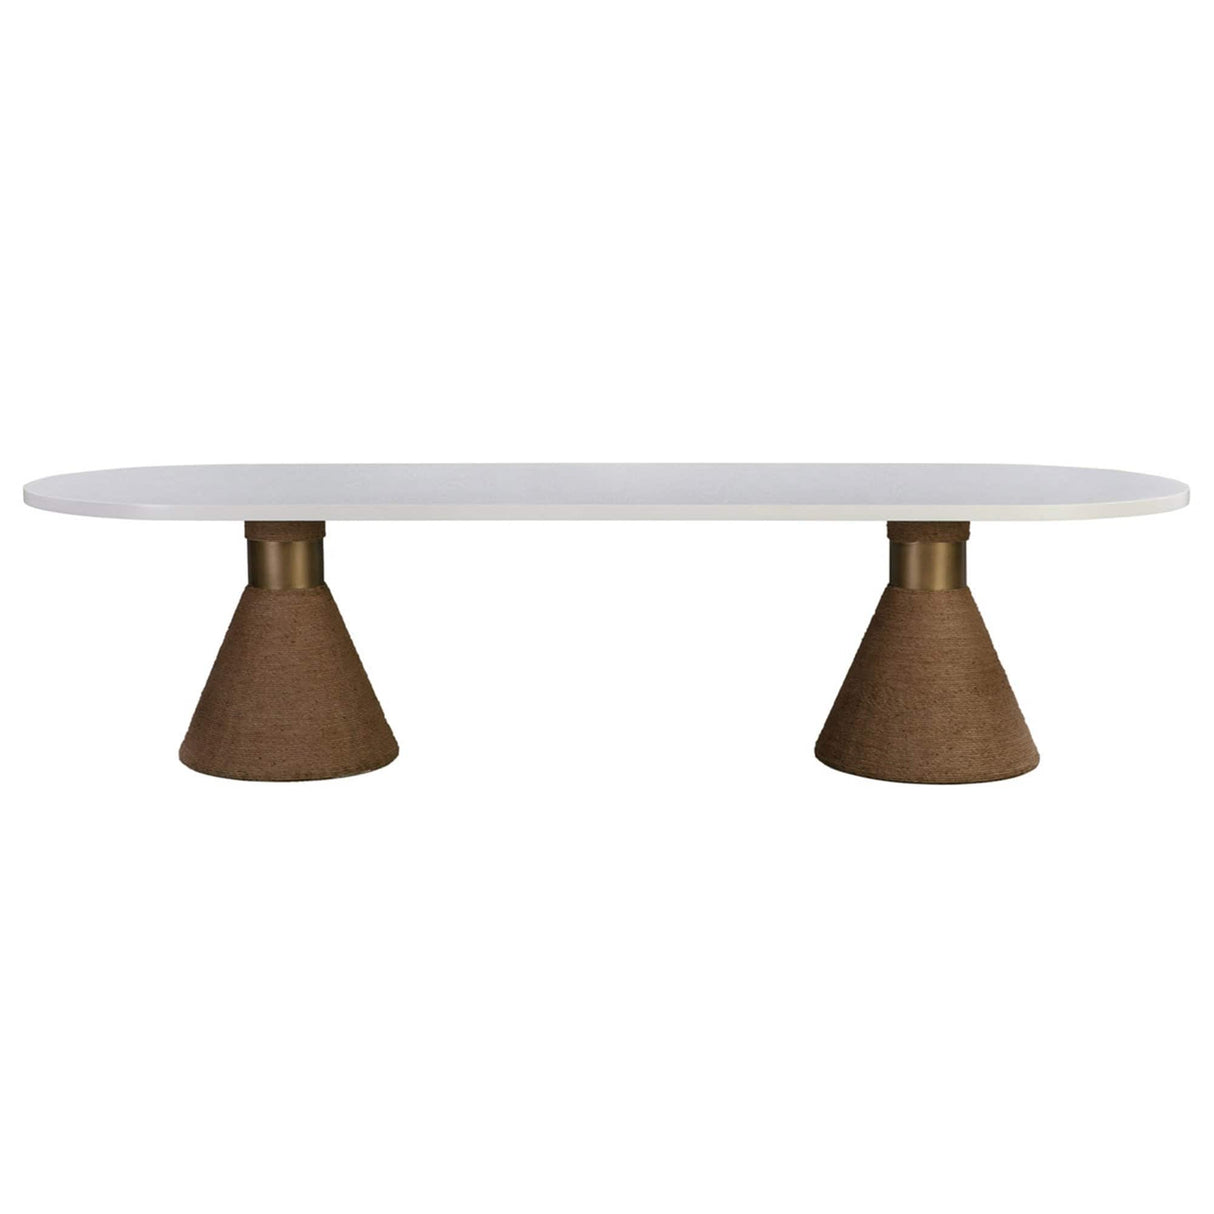 Candelabra Home Rishi Rope Dining Table - Natural Furniture TOV-D44048